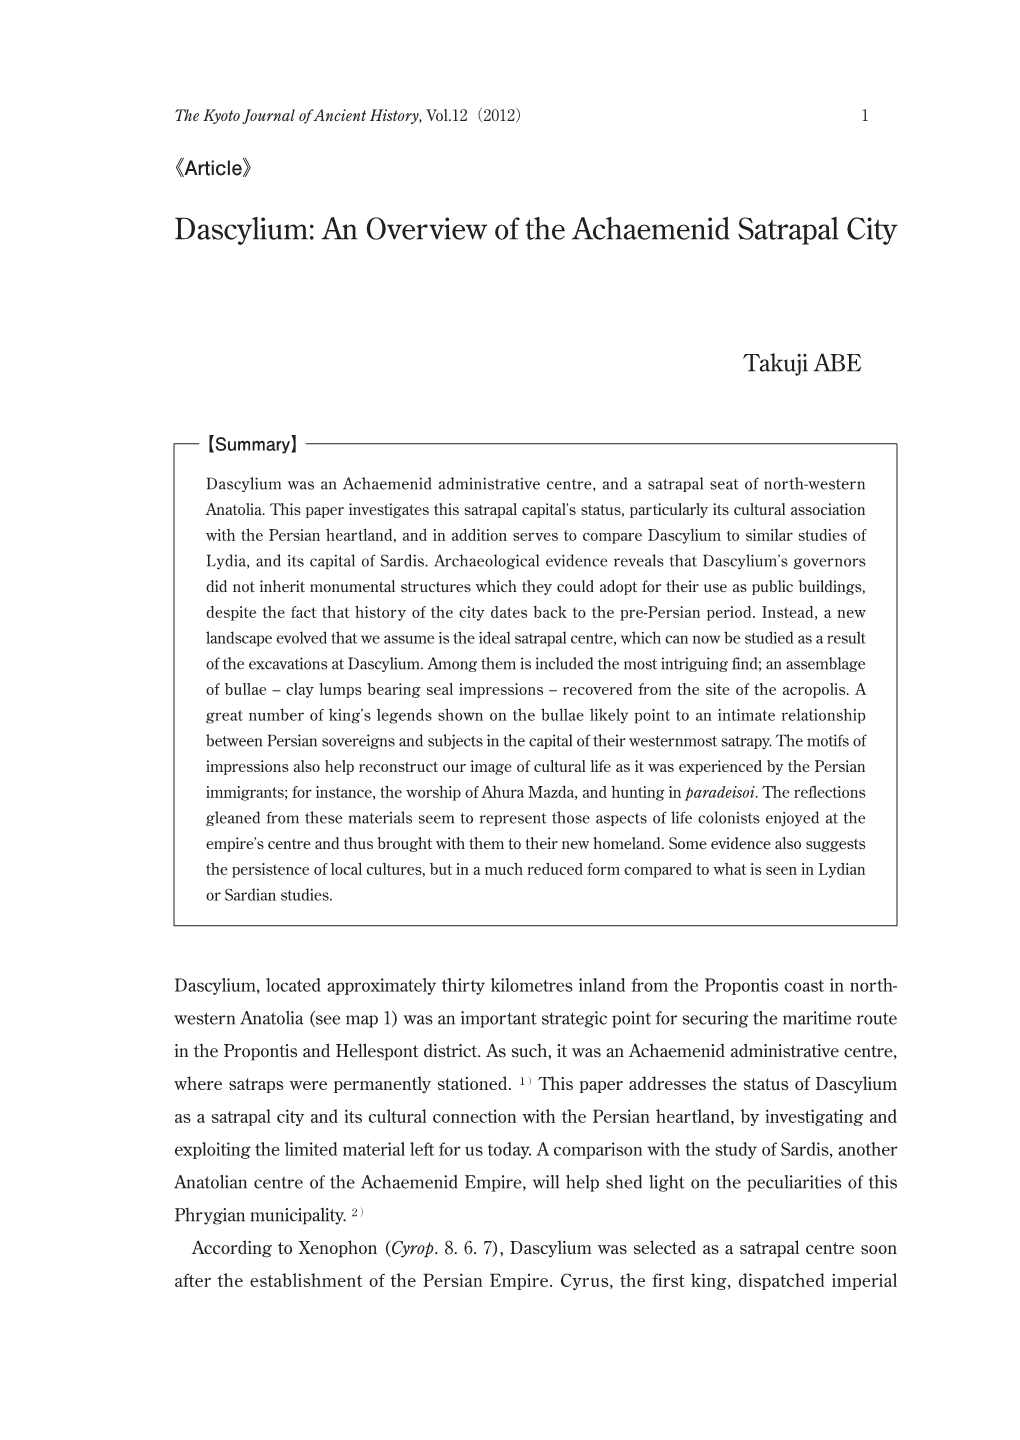 Dascylium: an Overview of the Achaemenid Satrapal City